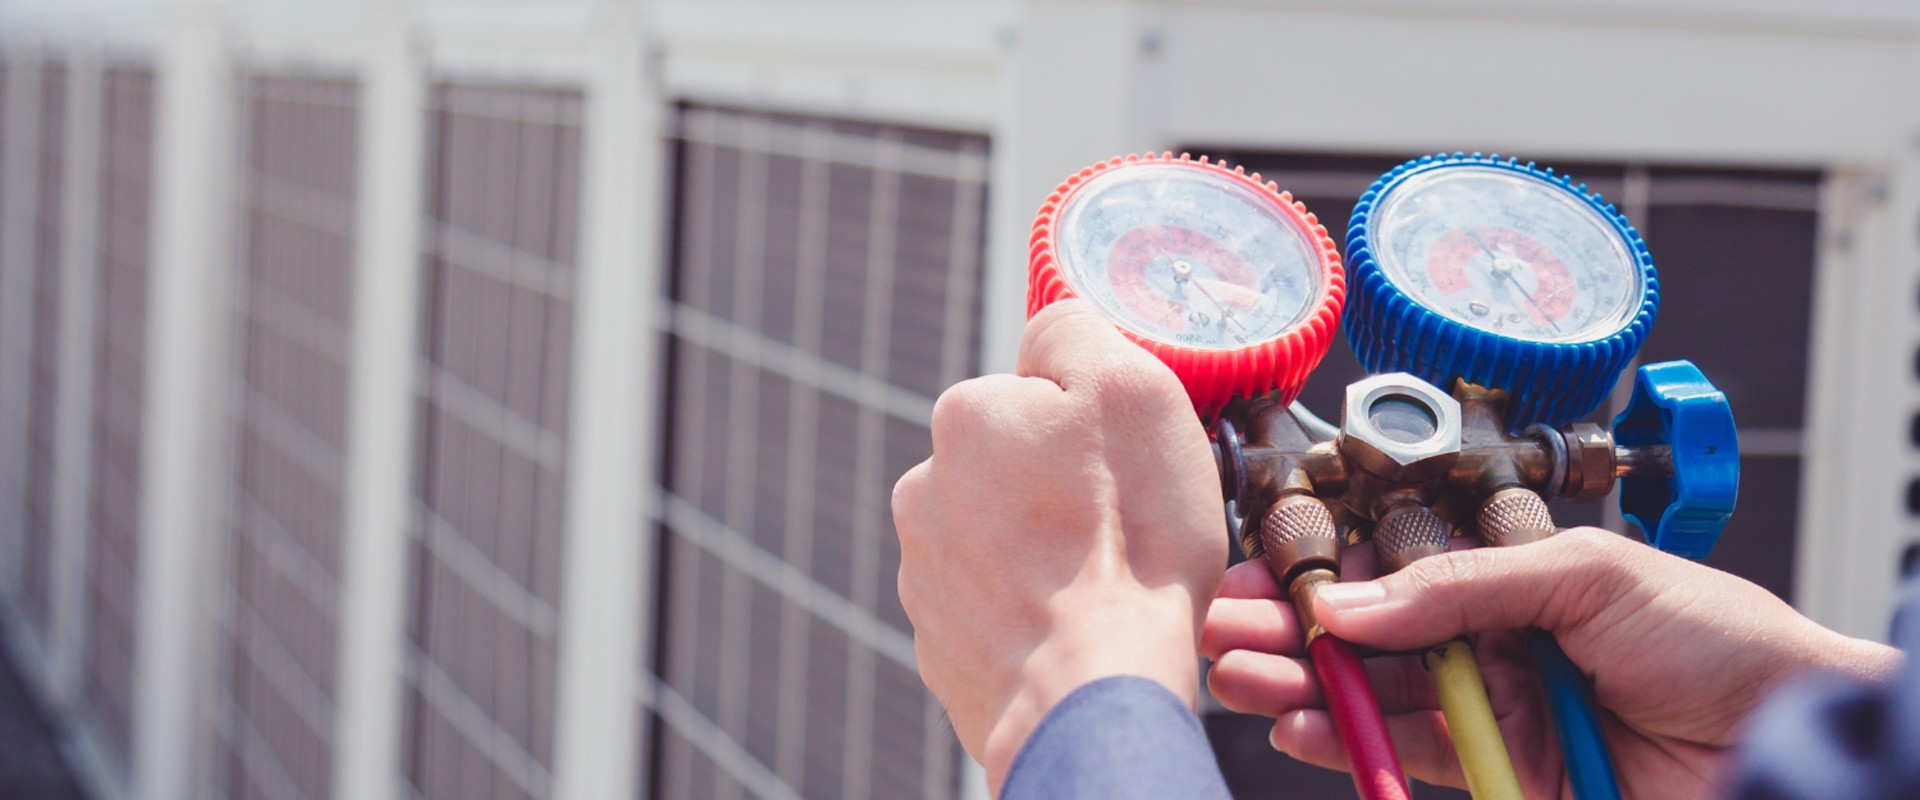 Finding a Qualified HVAC Contractor in West Palm Beach, FL